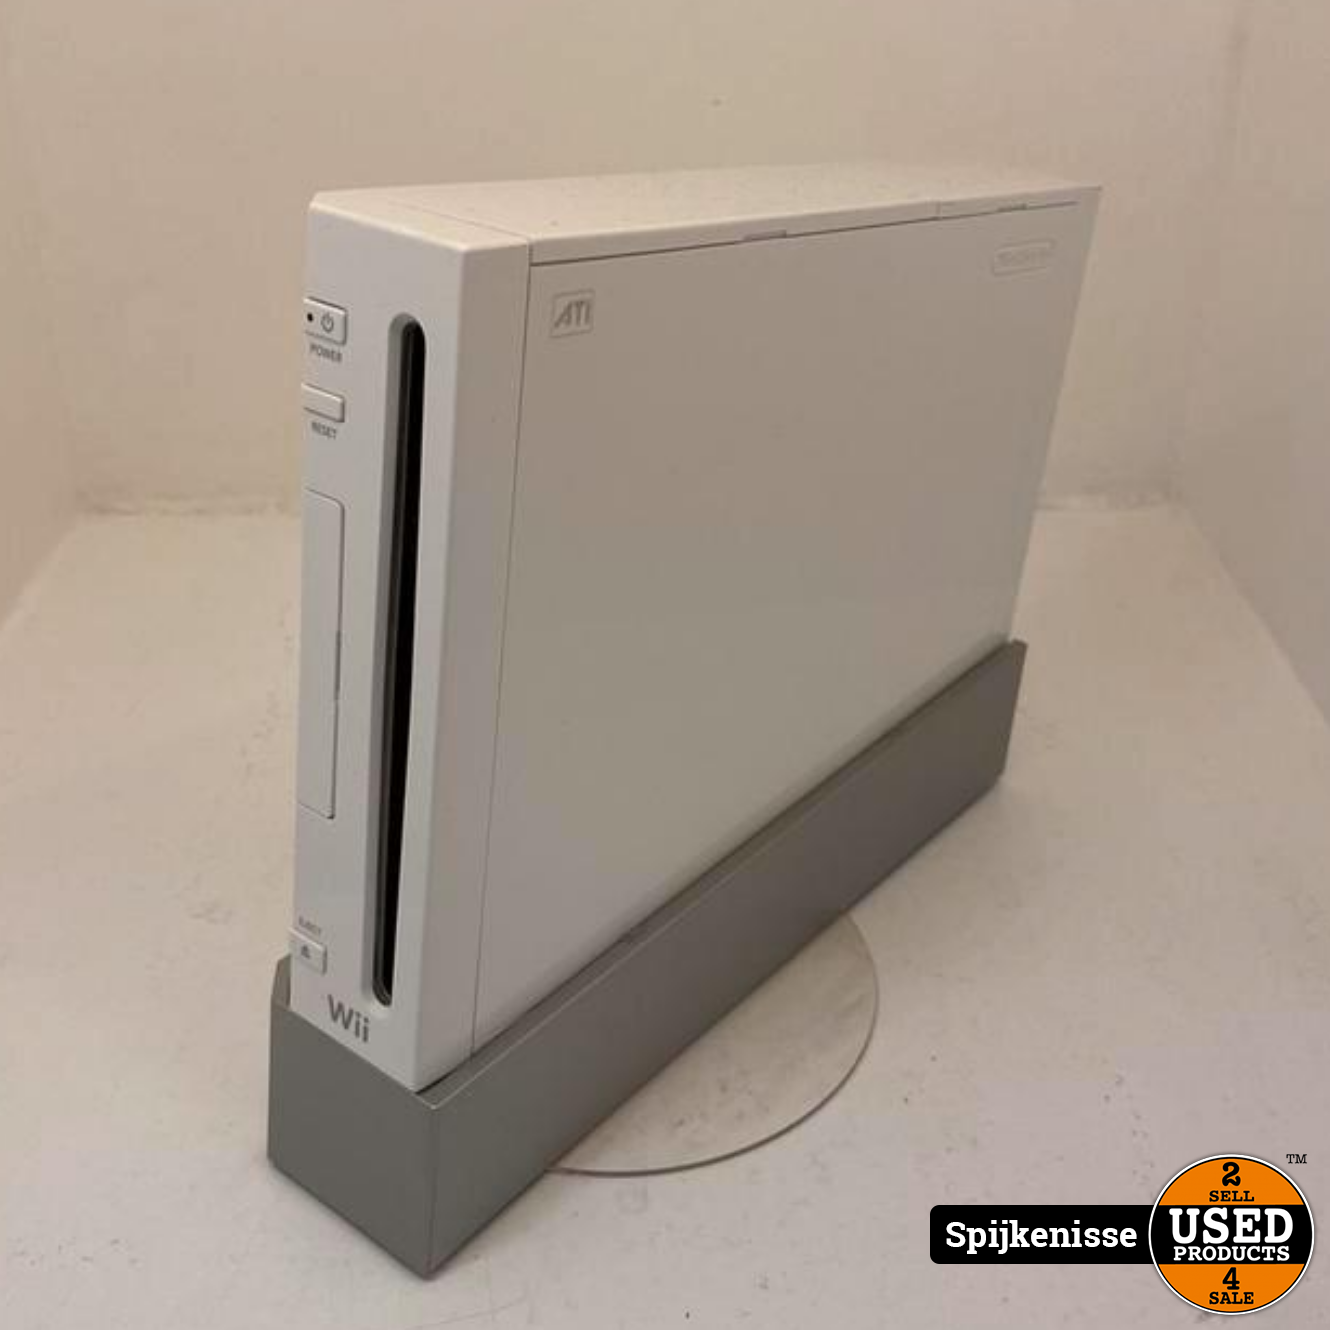 Wii *805772* Used Products Spijkenisse